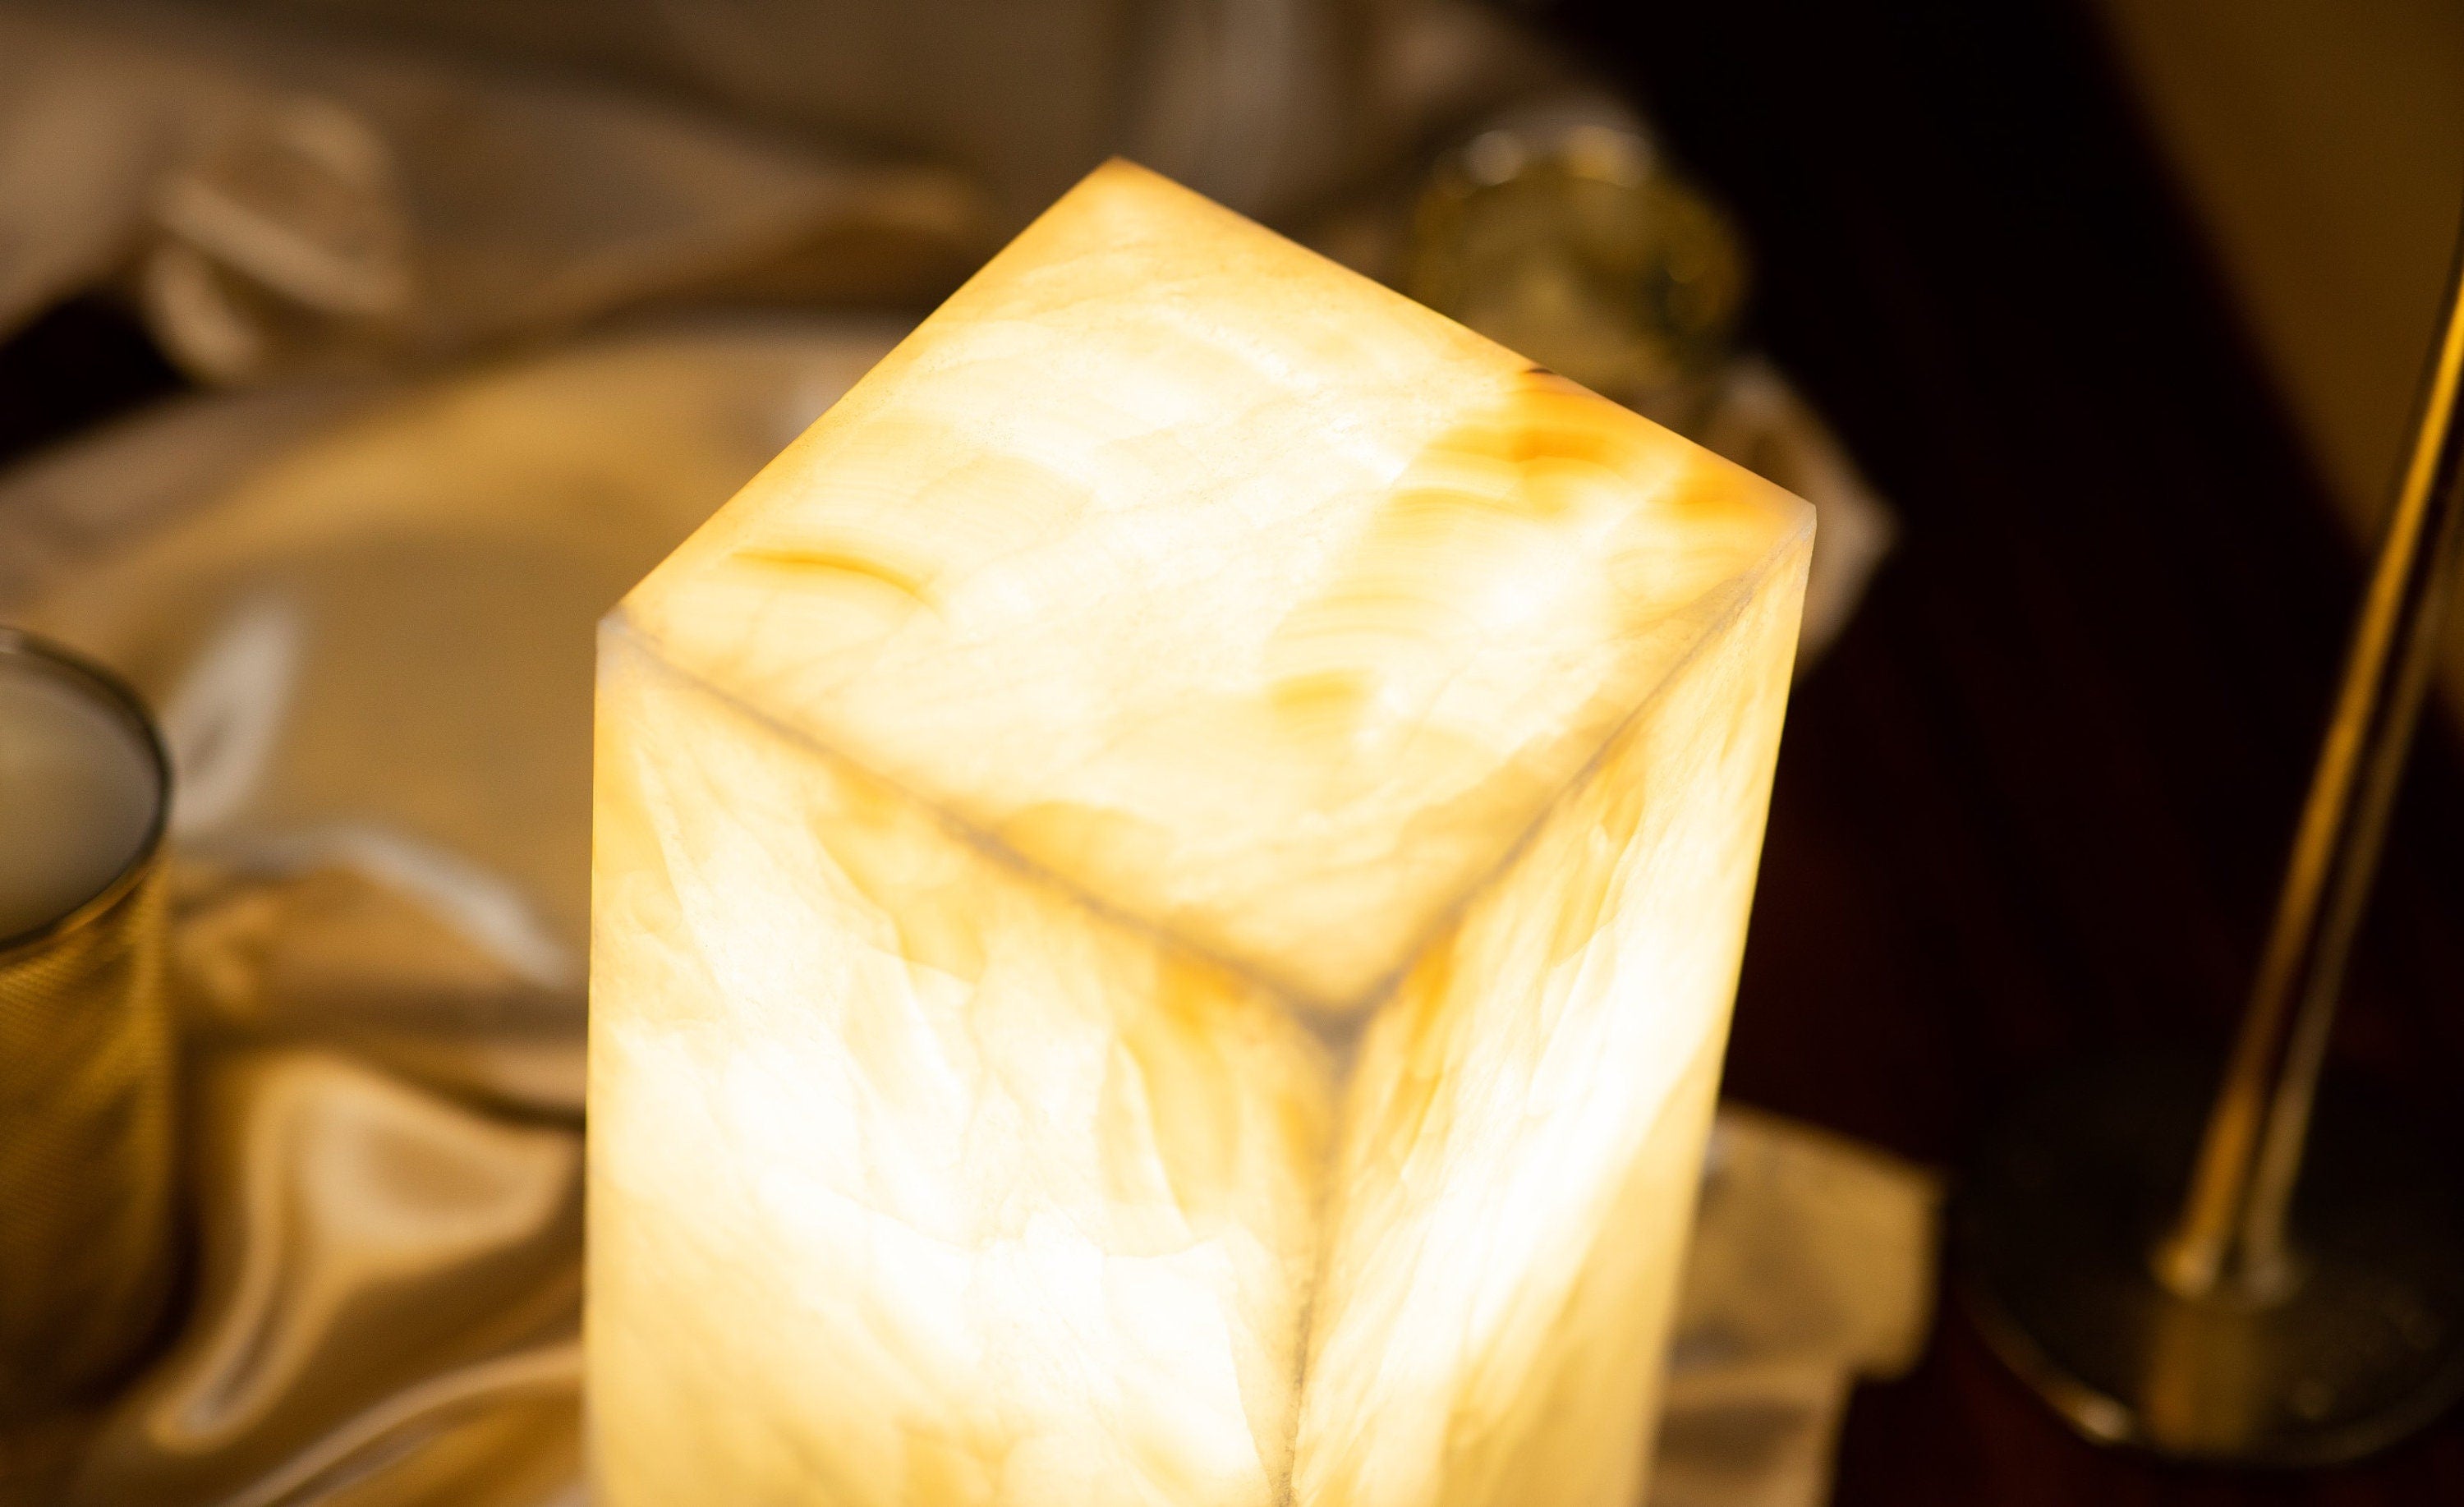 Crystalized Calcite Lamp - One of a Kind - 12 Inches